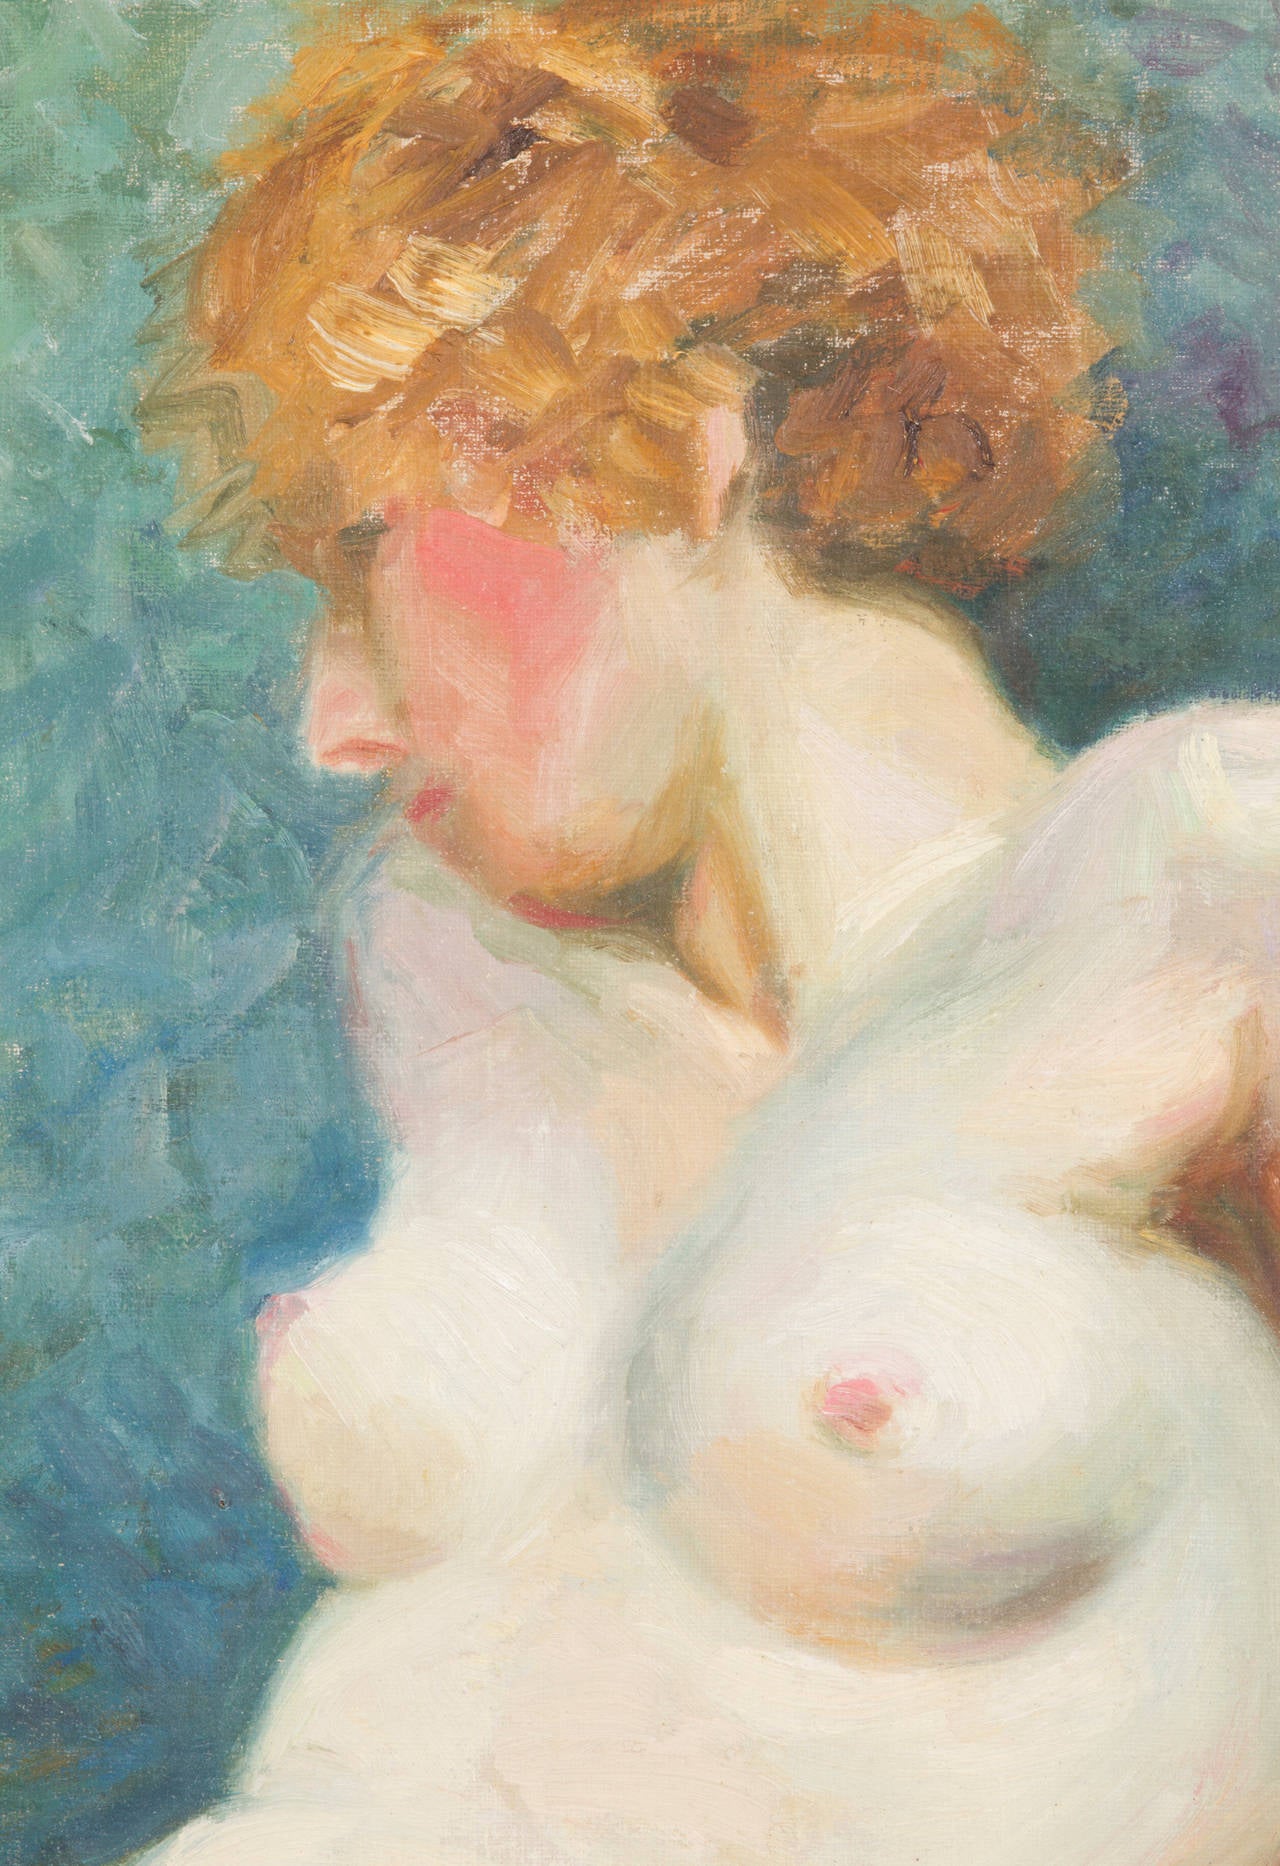 American Nude Painting by L. Charlton For Sale